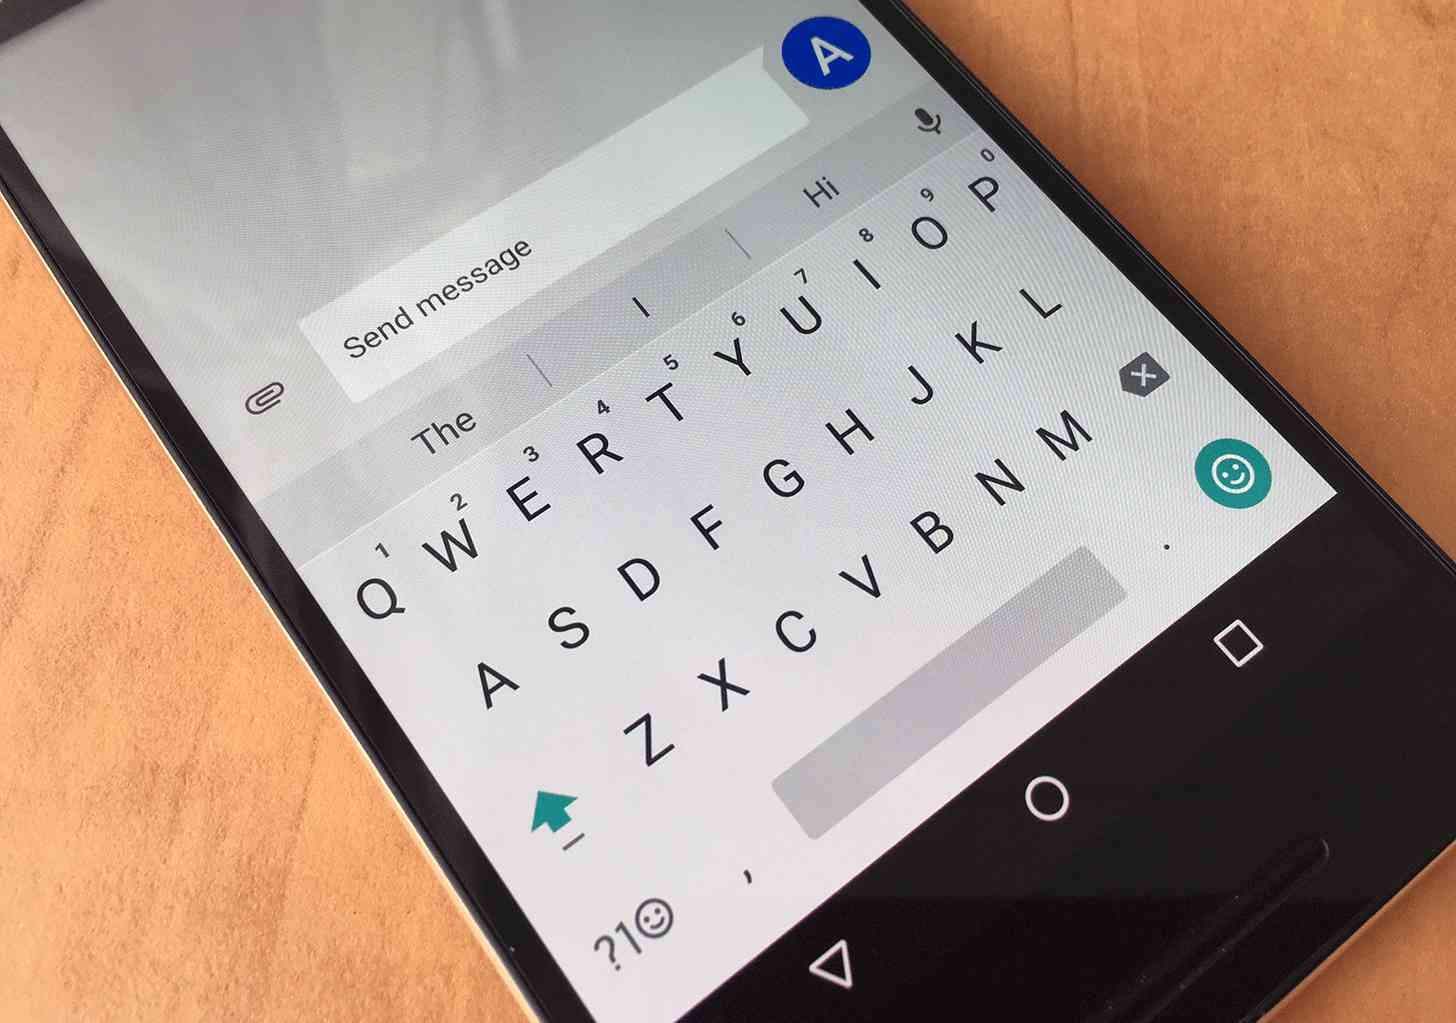 Android keyboard